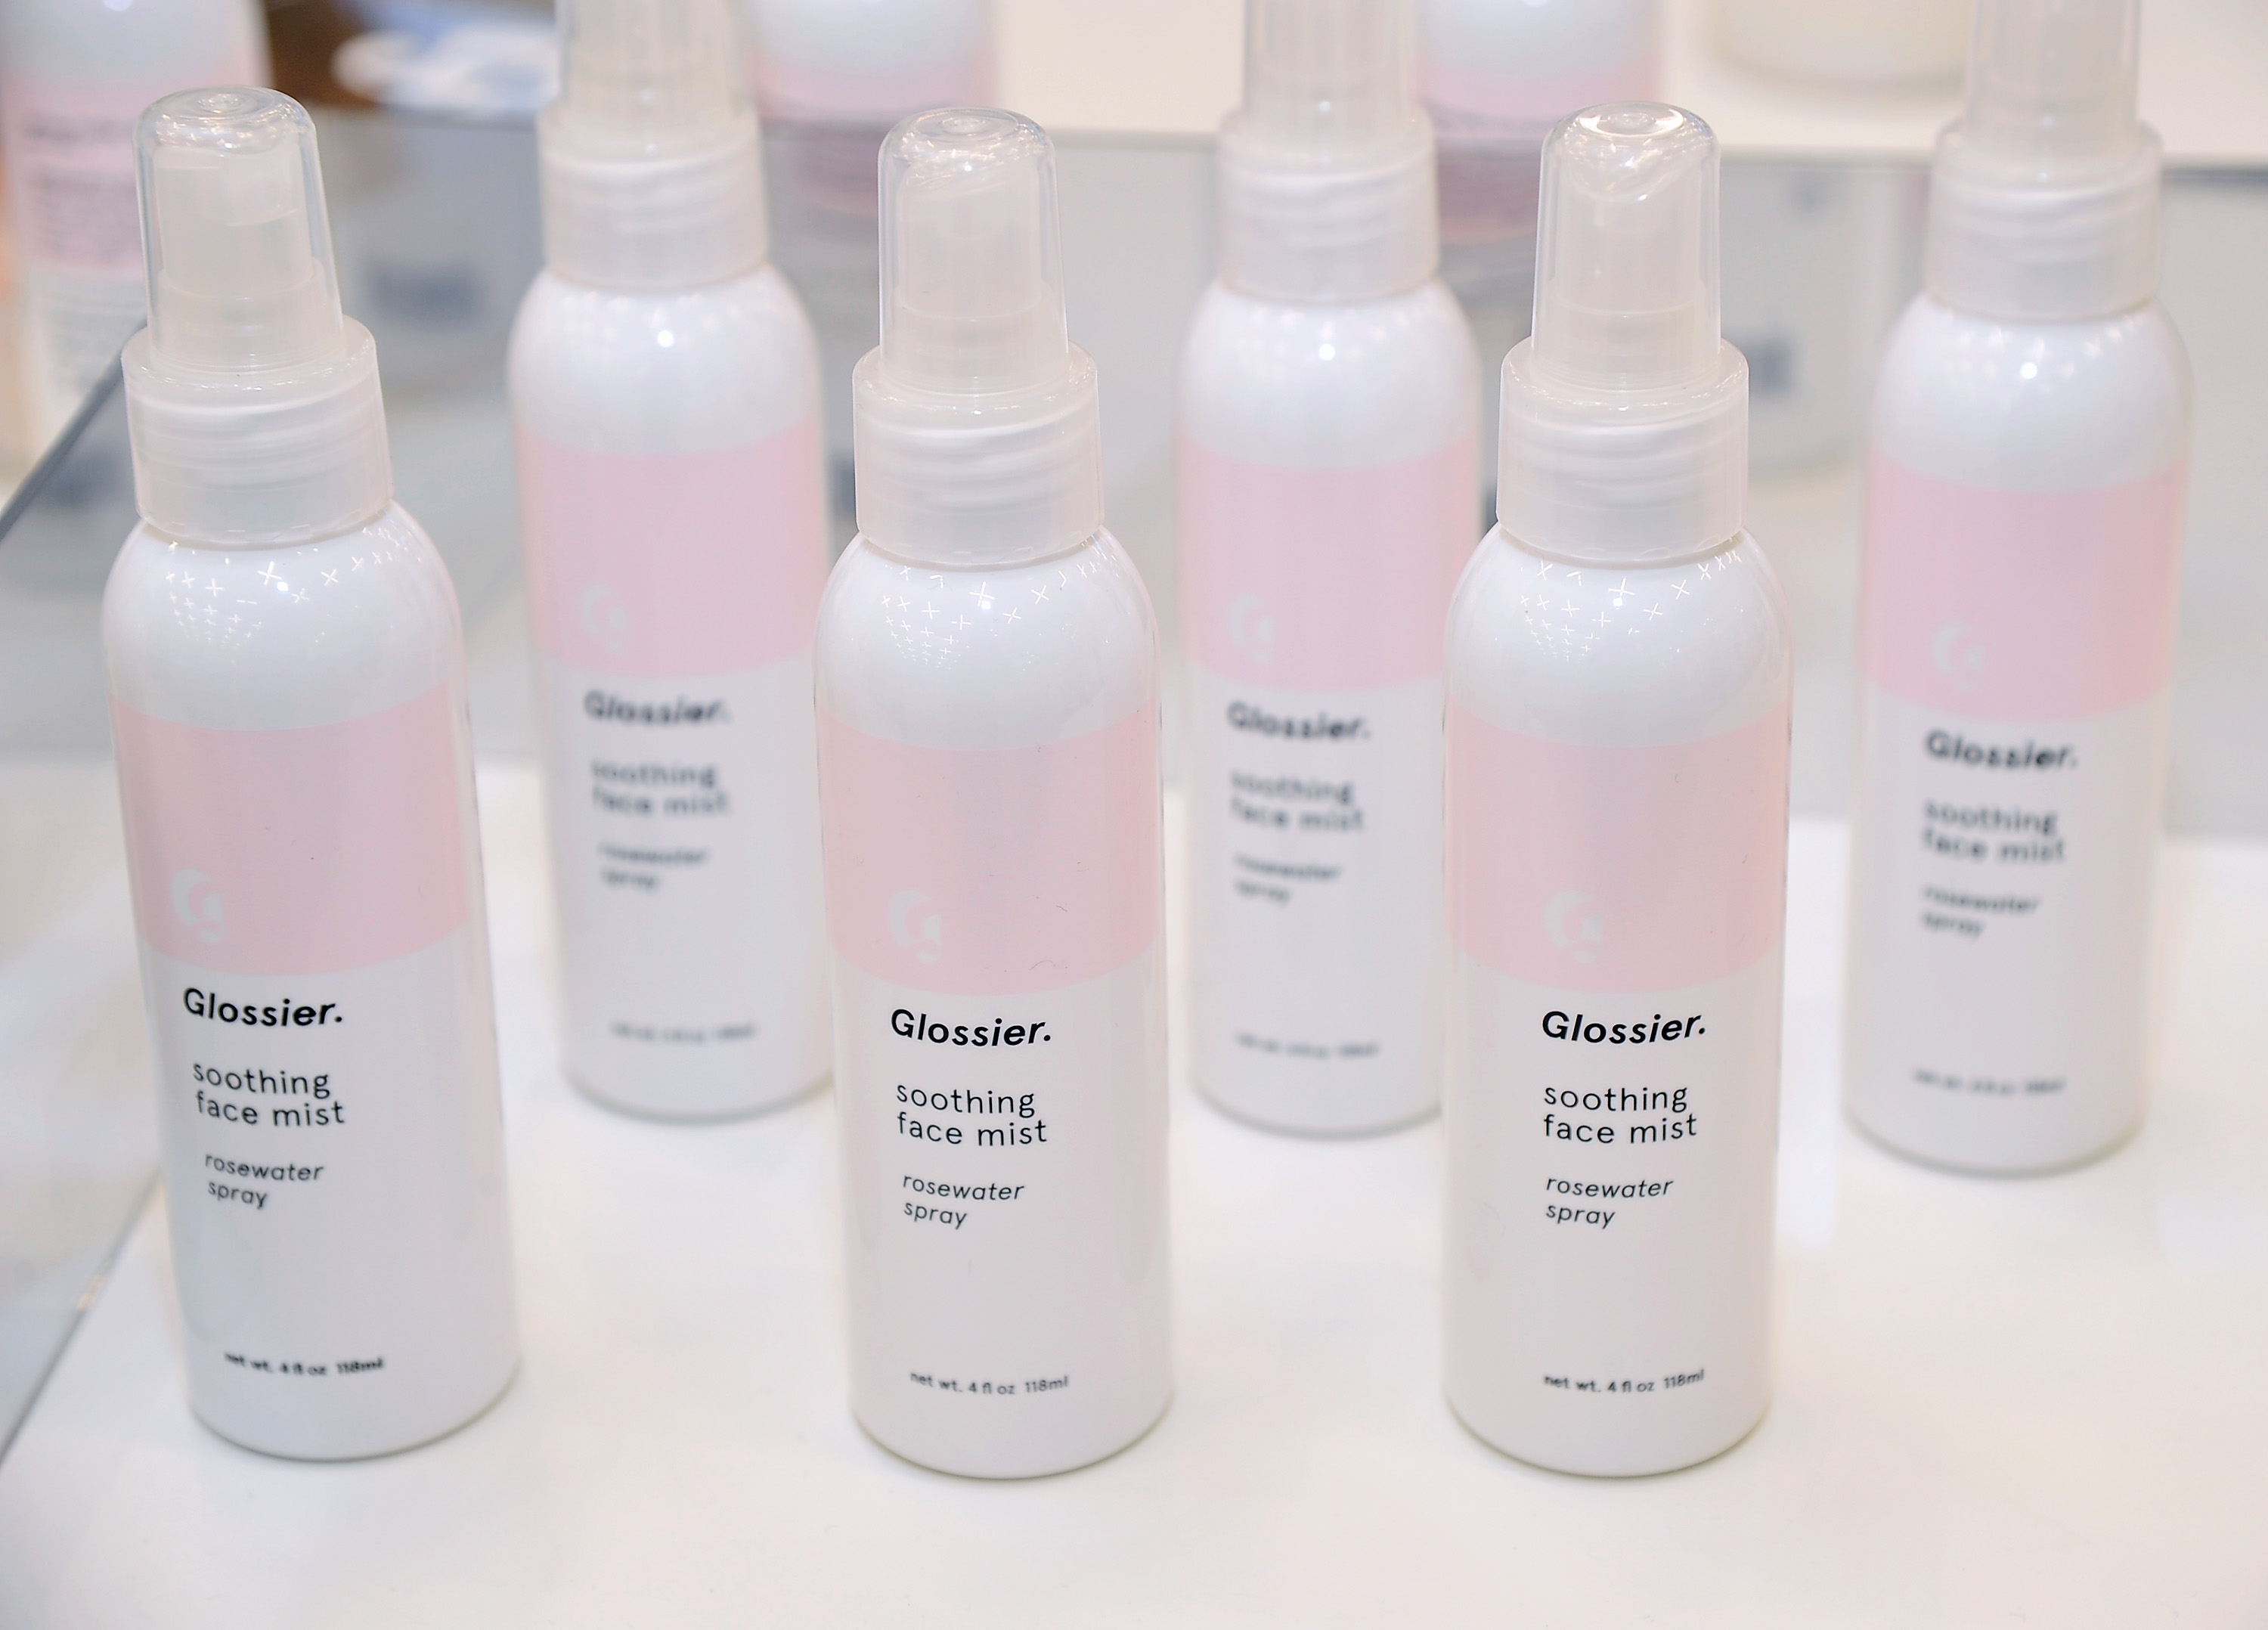 Glossier Strikes Deal With Sephora in First Retail Partnership